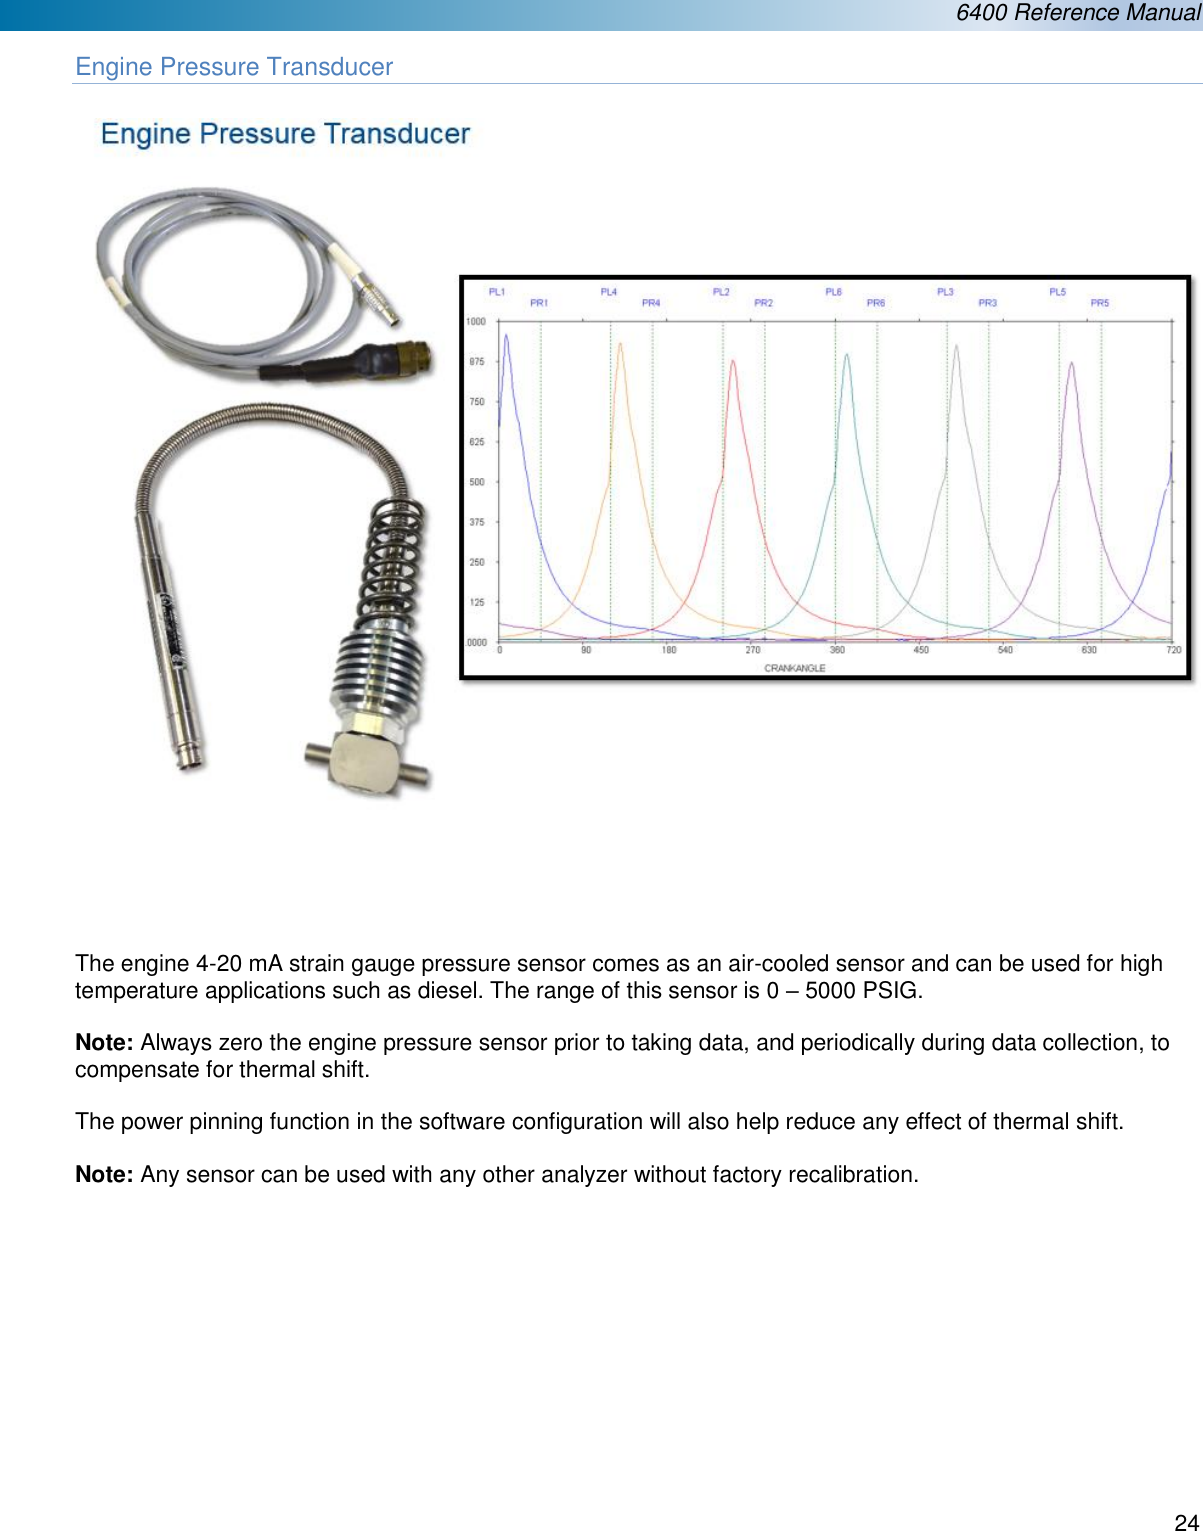  6400 Reference Manual  24  Engine Pressure Transducer        The engine 4-20 mA strain gauge pressure sensor comes as an air-cooled sensor and can be used for high temperature applications such as diesel. The range of this sensor is 0 – 5000 PSIG.  Note: Always zero the engine pressure sensor prior to taking data, and periodically during data collection, to compensate for thermal shift.   The power pinning function in the software configuration will also help reduce any effect of thermal shift.   Note: Any sensor can be used with any other analyzer without factory recalibration.            